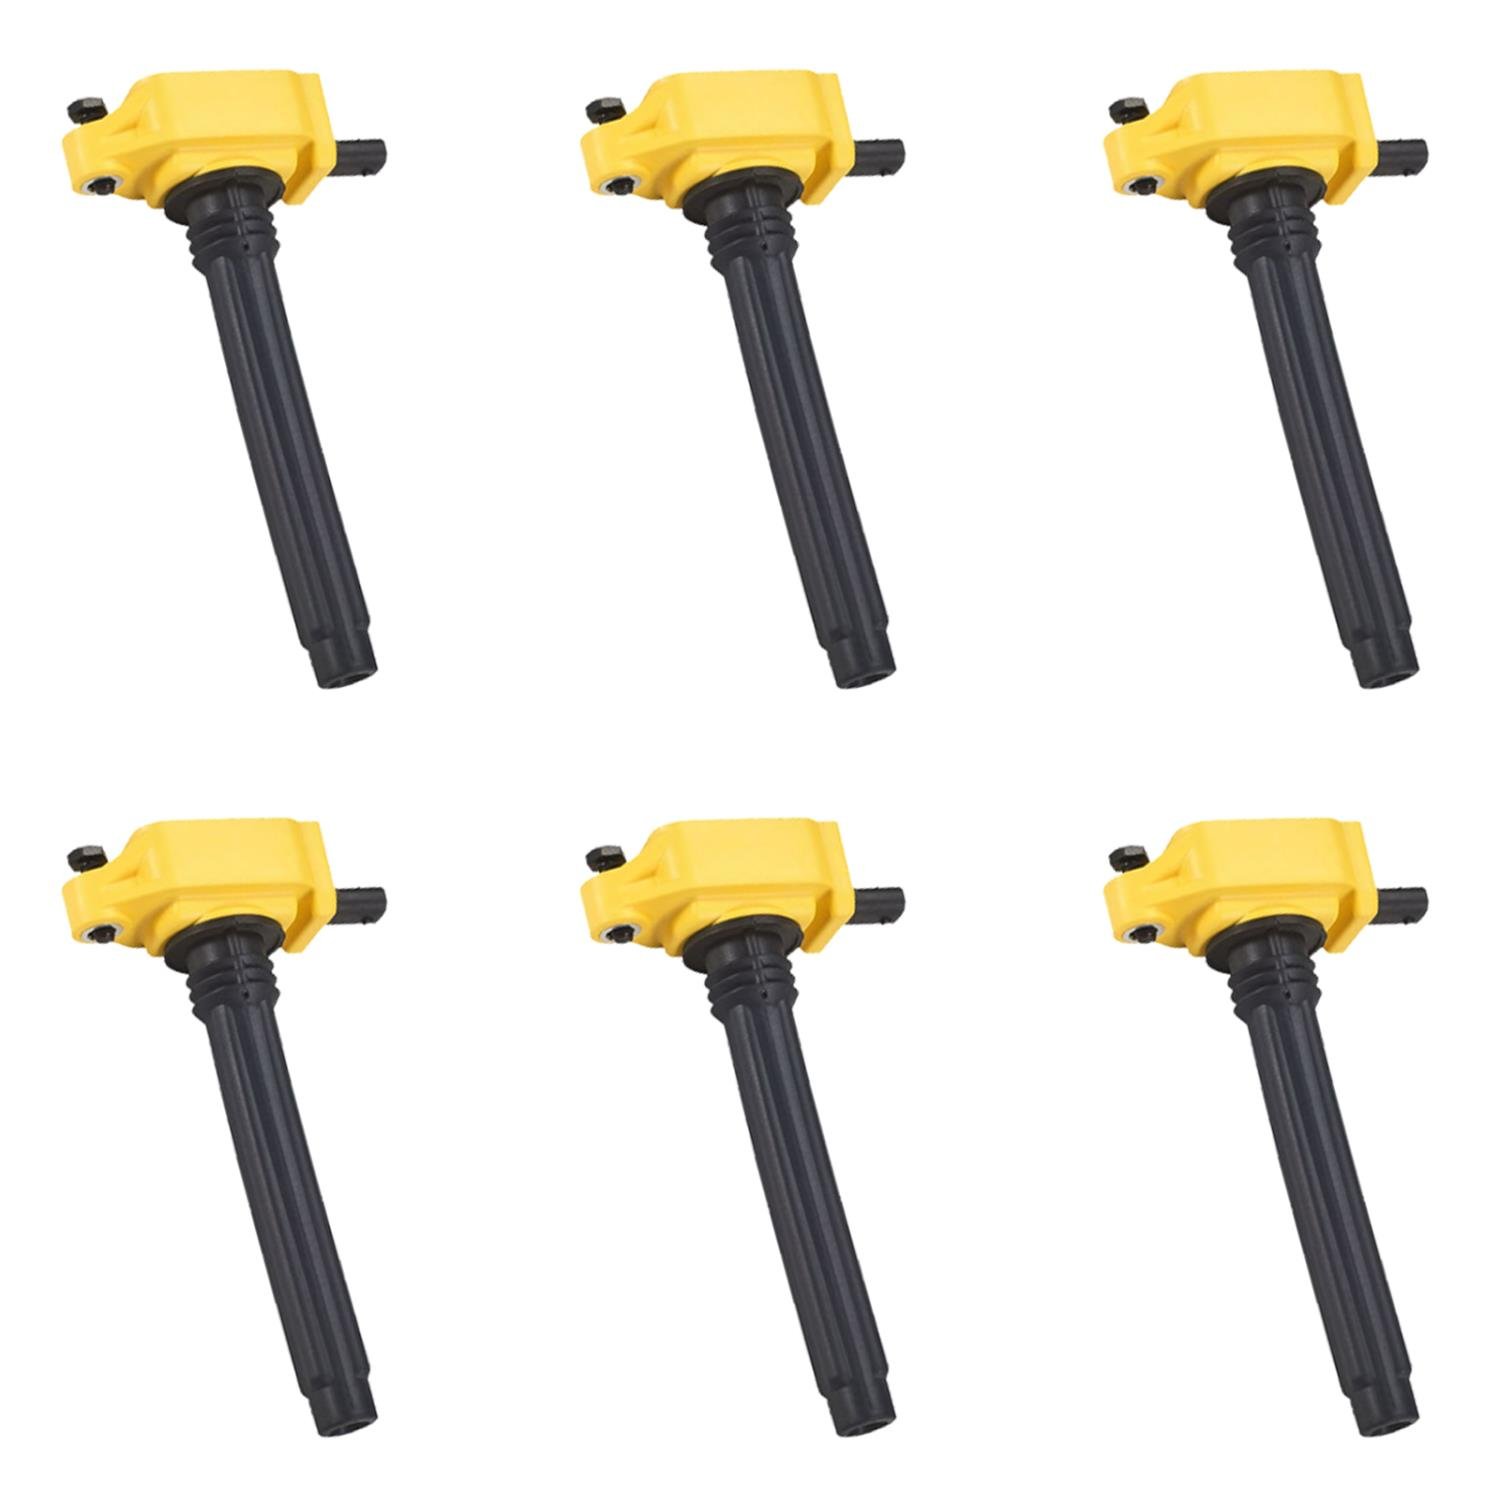 High-Performance Ignition Coils for Mopar [Yellow]